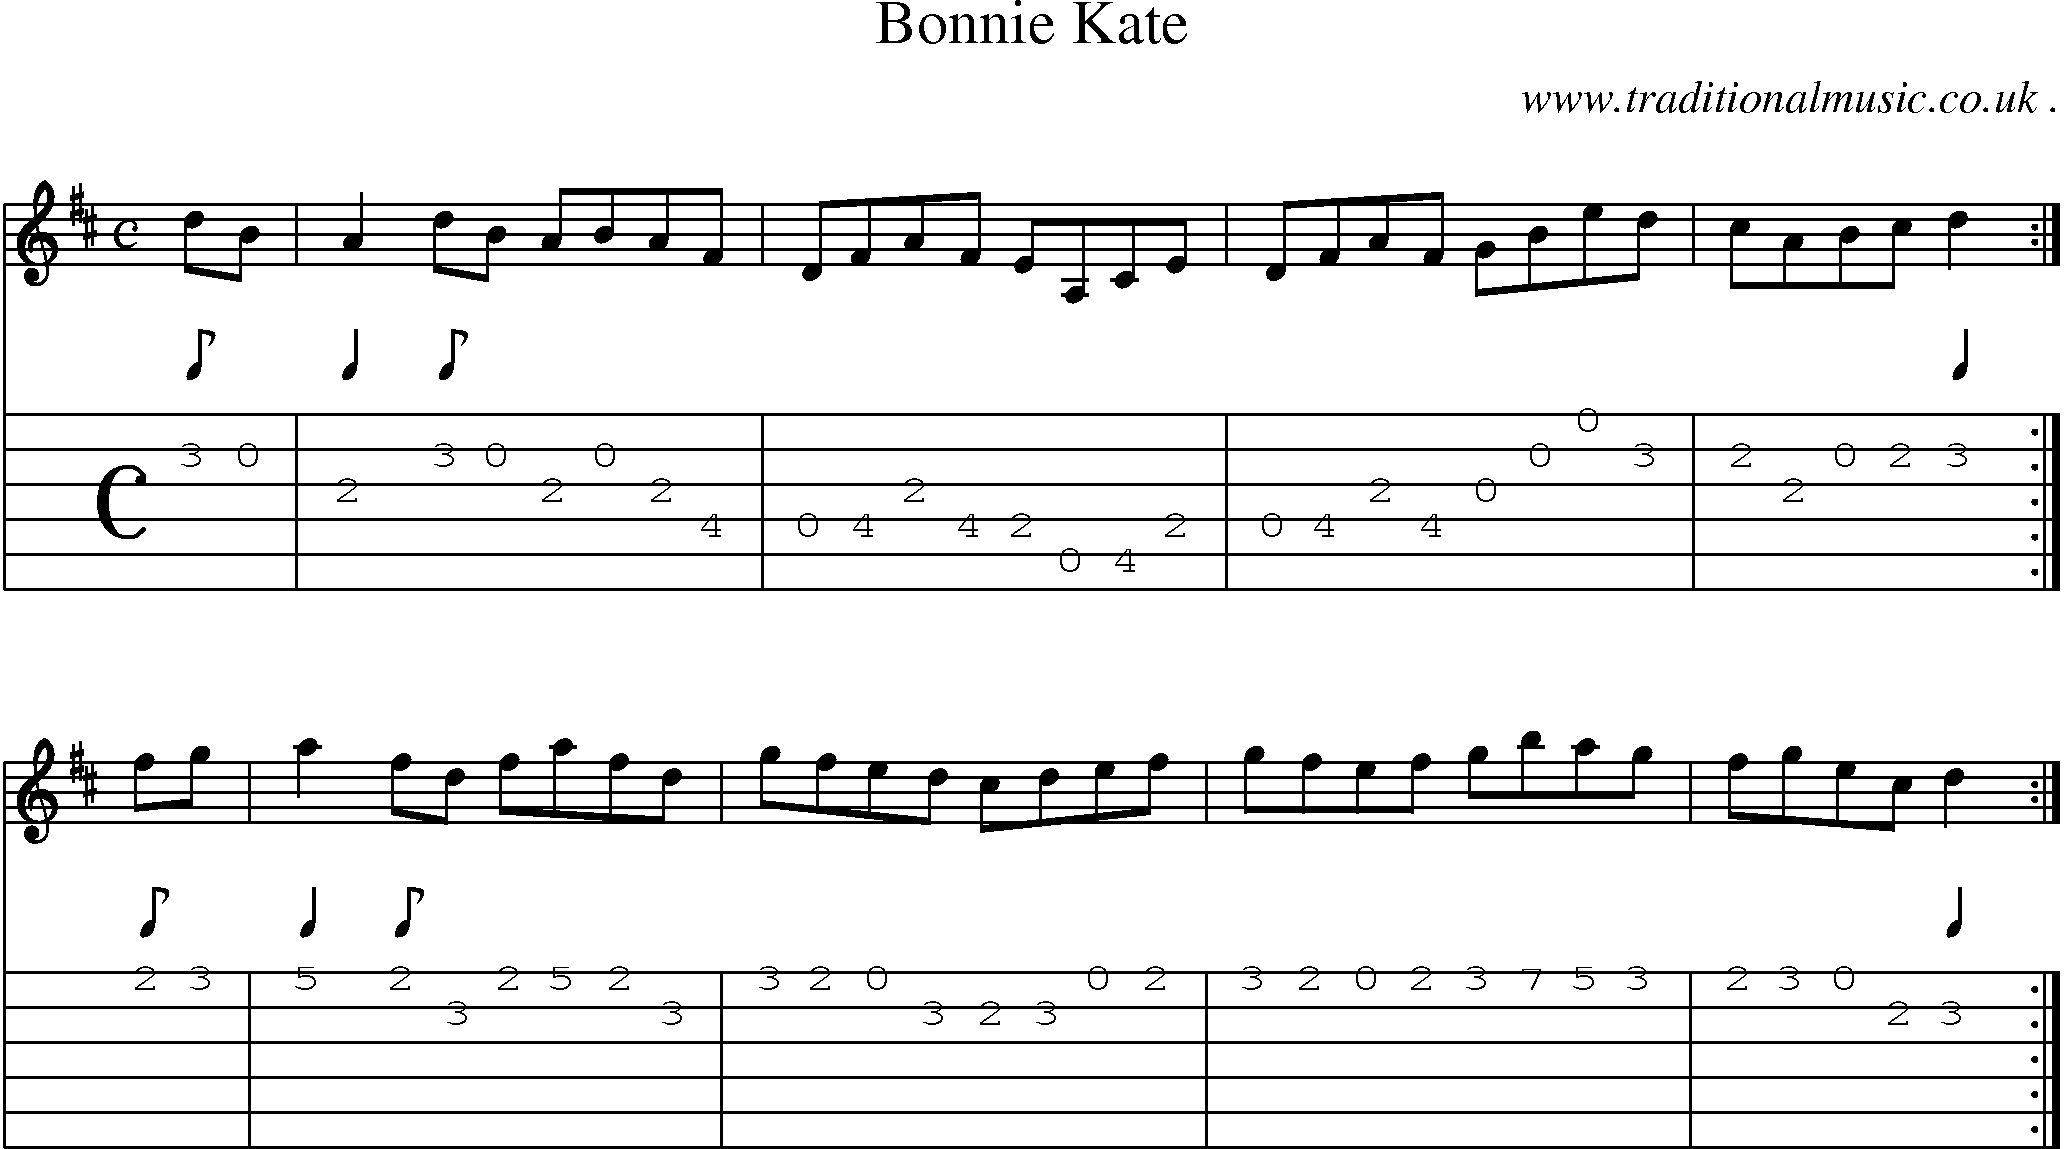 Sheet-Music and Guitar Tabs for Bonnie Kate